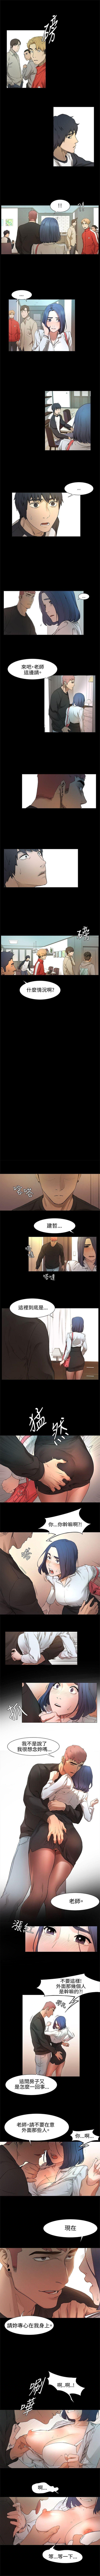 Amature 衝突 1-99 官方中文（連載中） Perfect Tits - Page 11